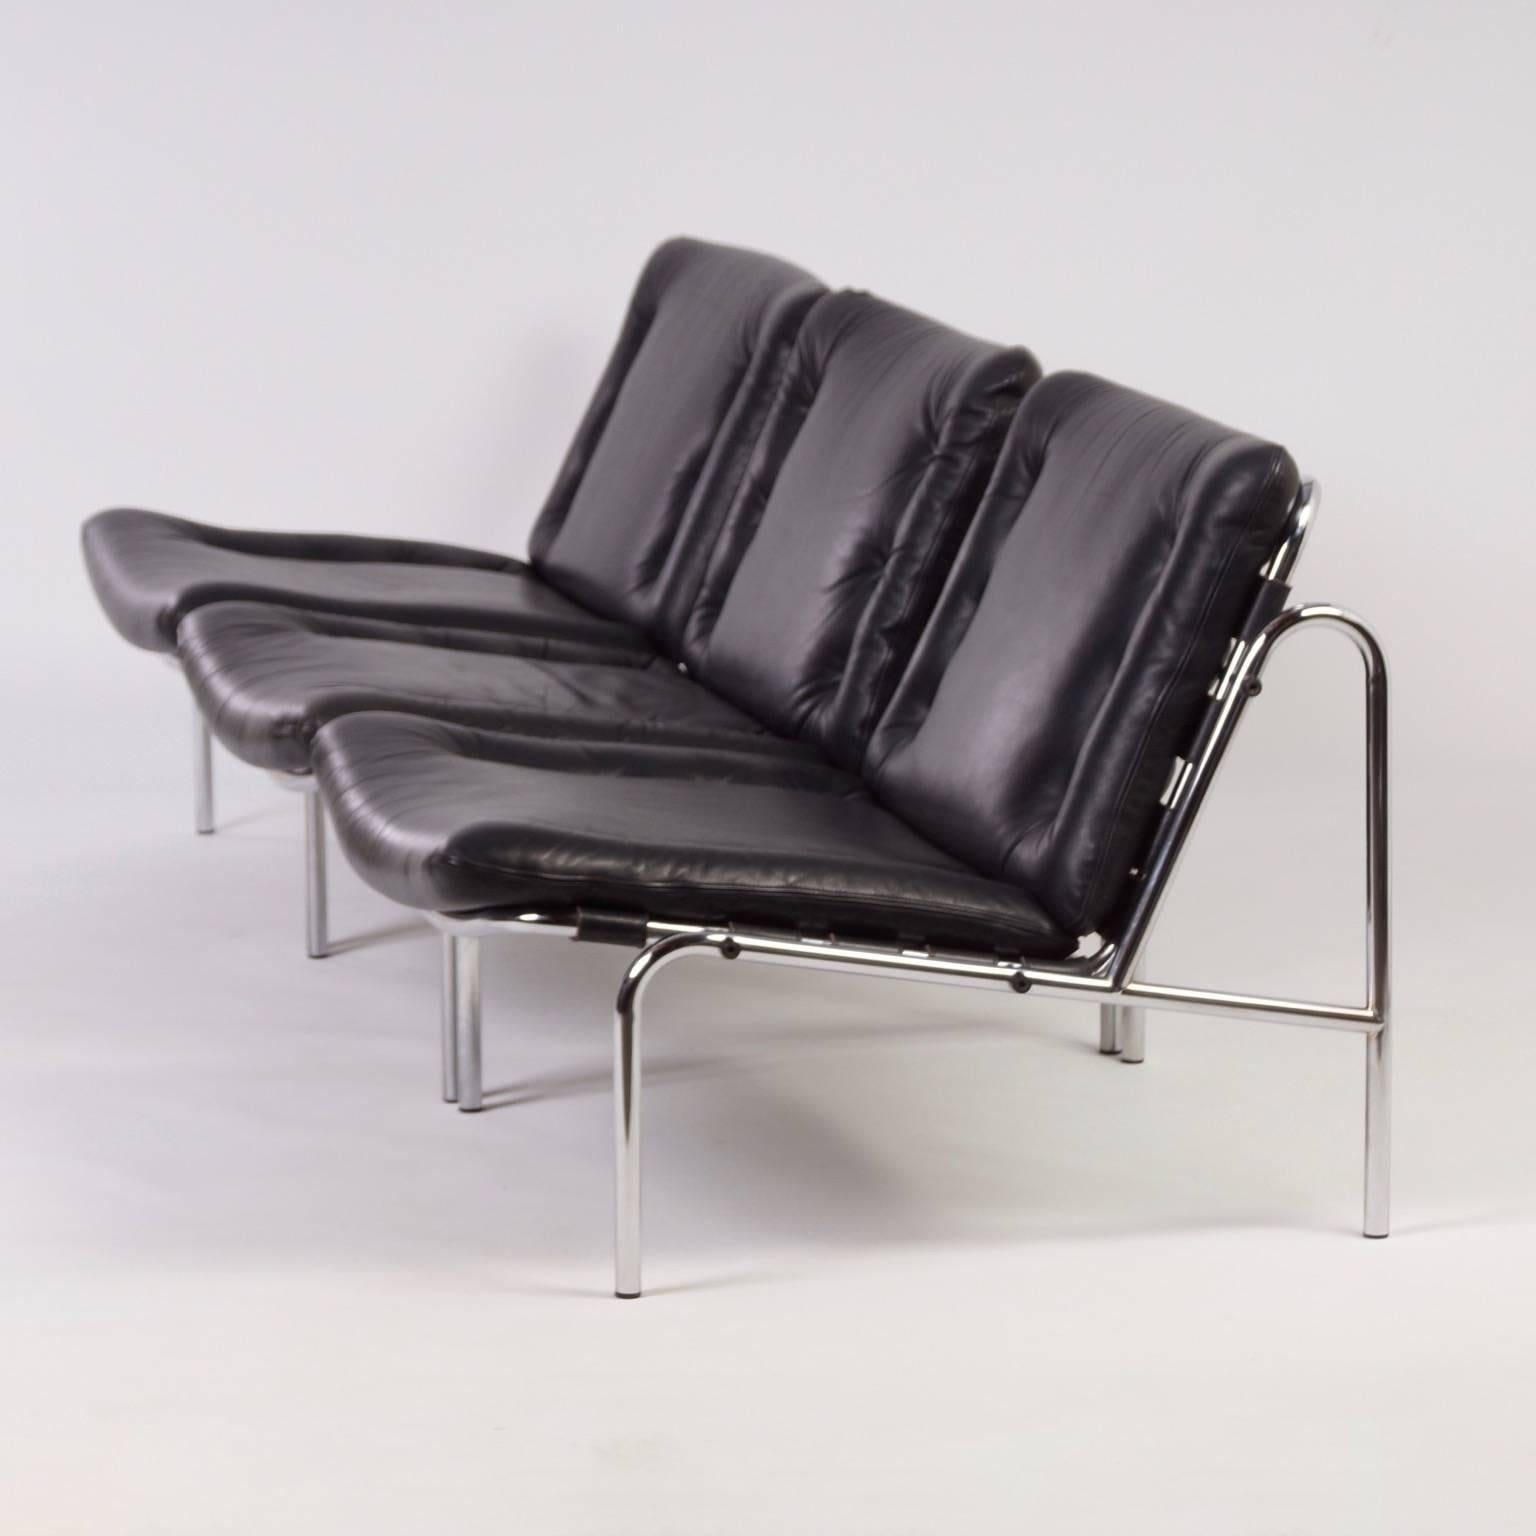 Set of three Osaka easy chairs designed by Martin fisherman for ‘T-Spectrum in 1969. This easy chair (model SZ077 / Nagoya 1) is part of the Osaka series designed by Martin Visser for the world fair in Japan (Osaka). These black leather easy chairs